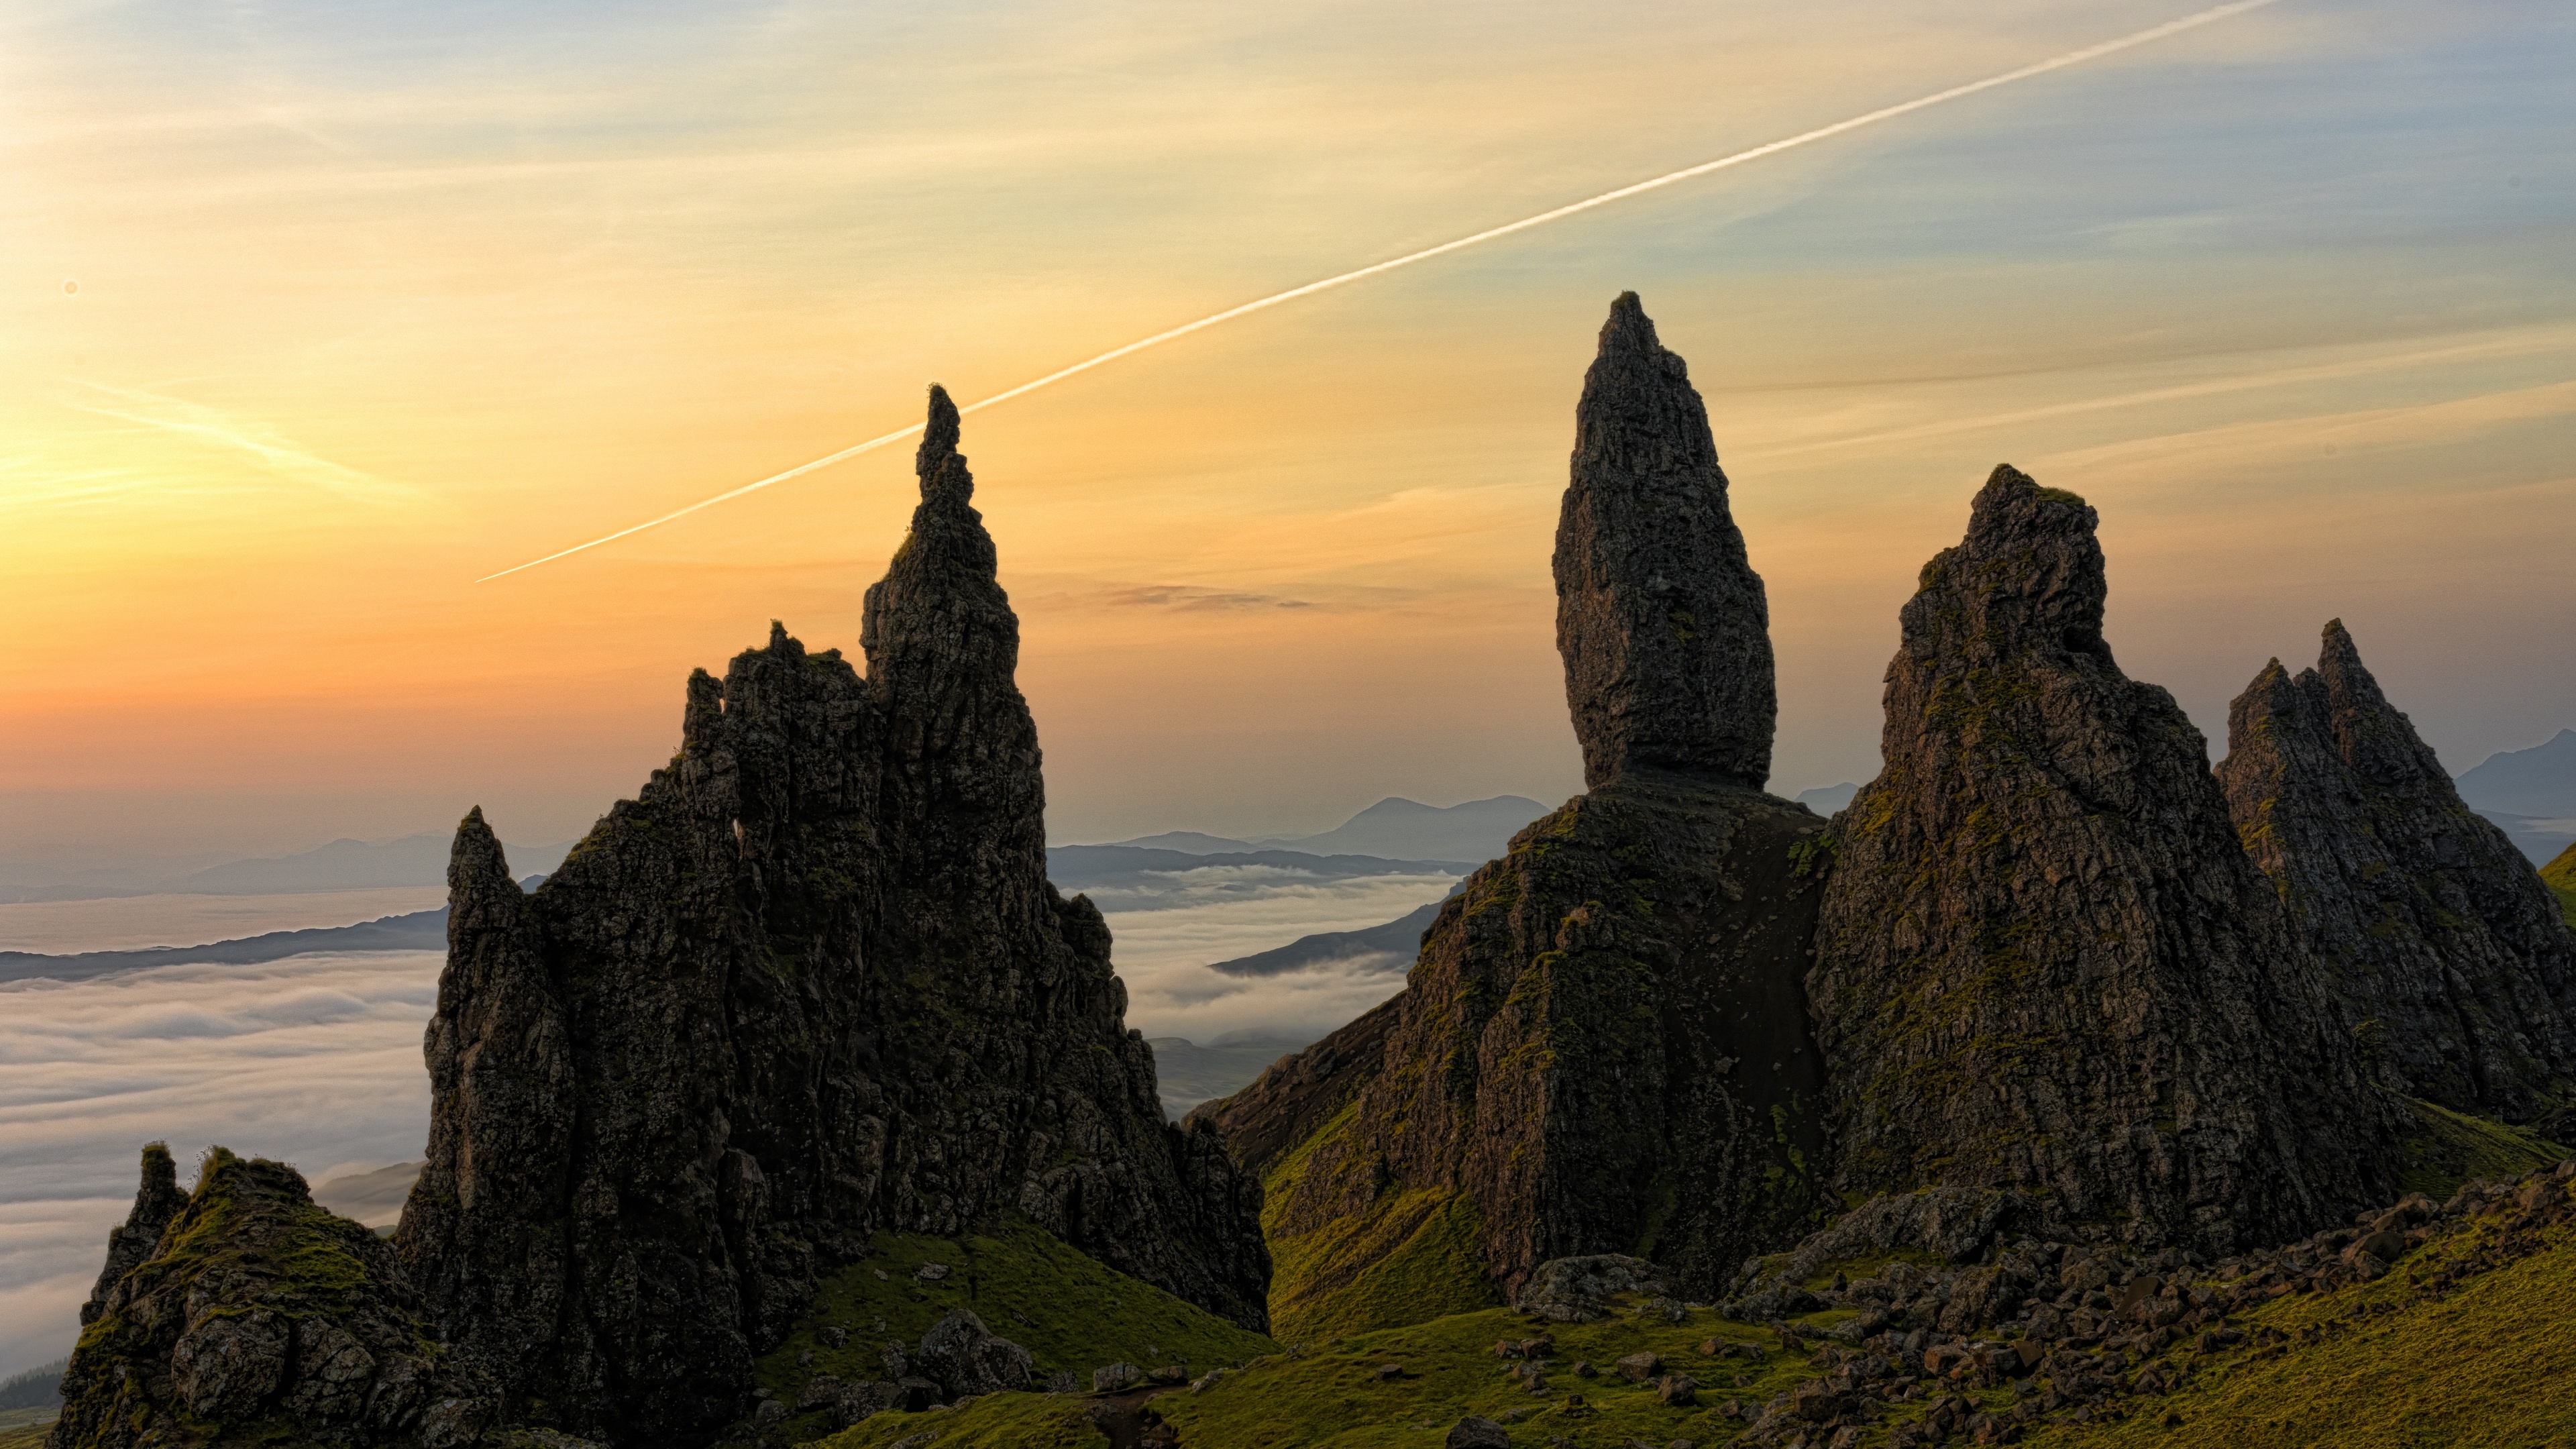 Sunset mountains, Dramatic skies, Ancient rock formations, Isle of Skye beauty, 3840x2160 4K Desktop